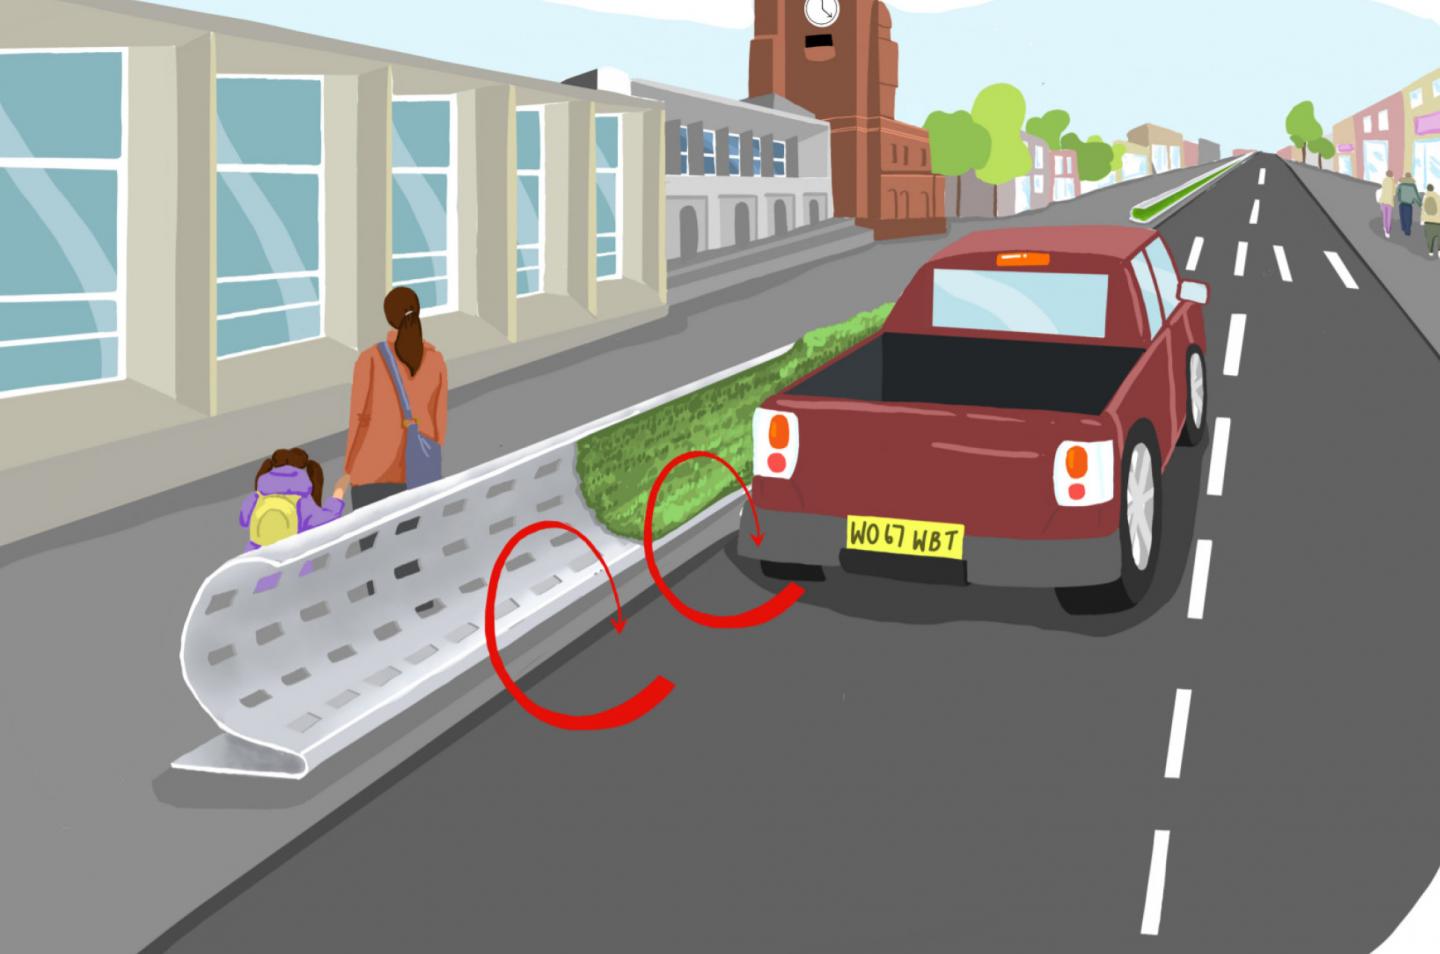 Curved barriers deflecting pollution generated by car